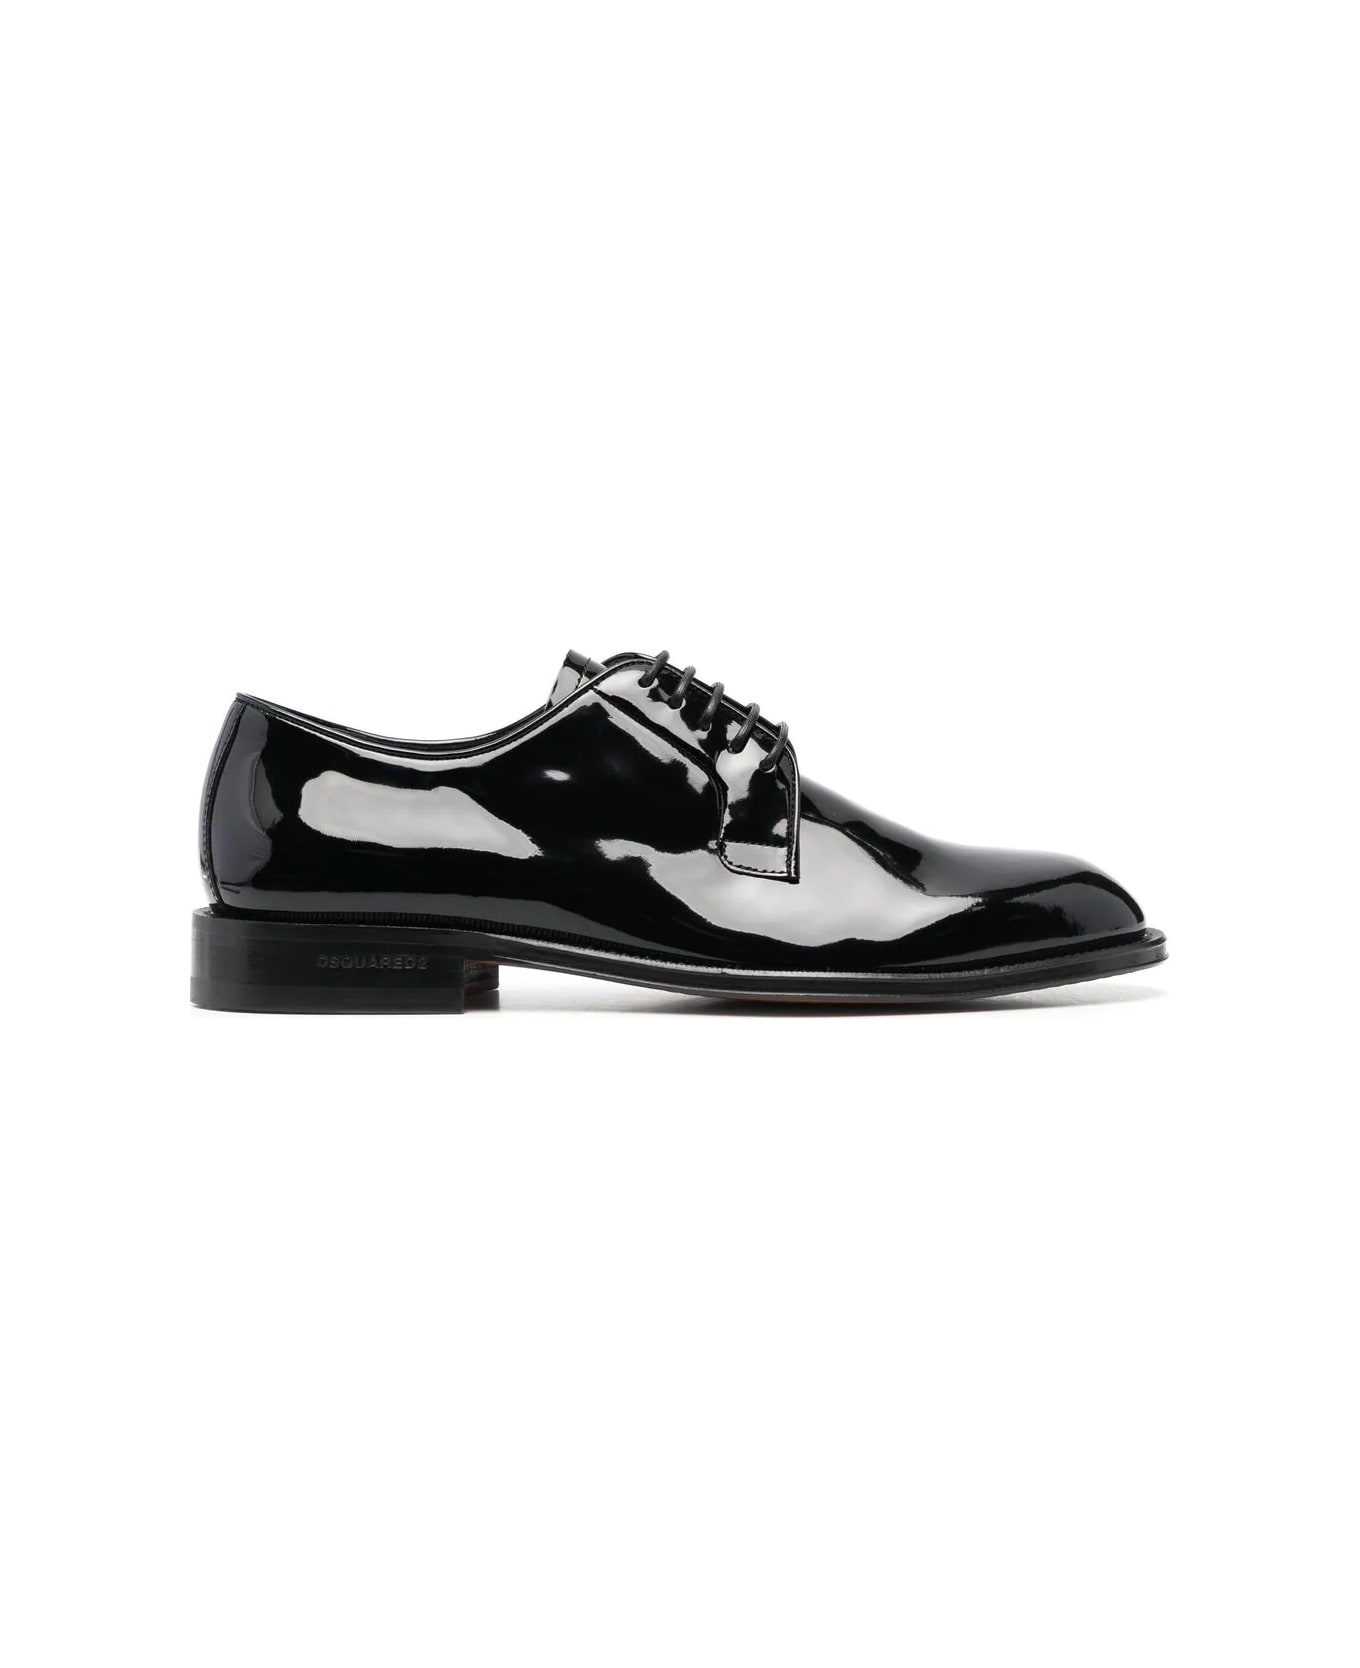 Dsquared2 Derby Shoes - Black ローファー＆デッキシューズ